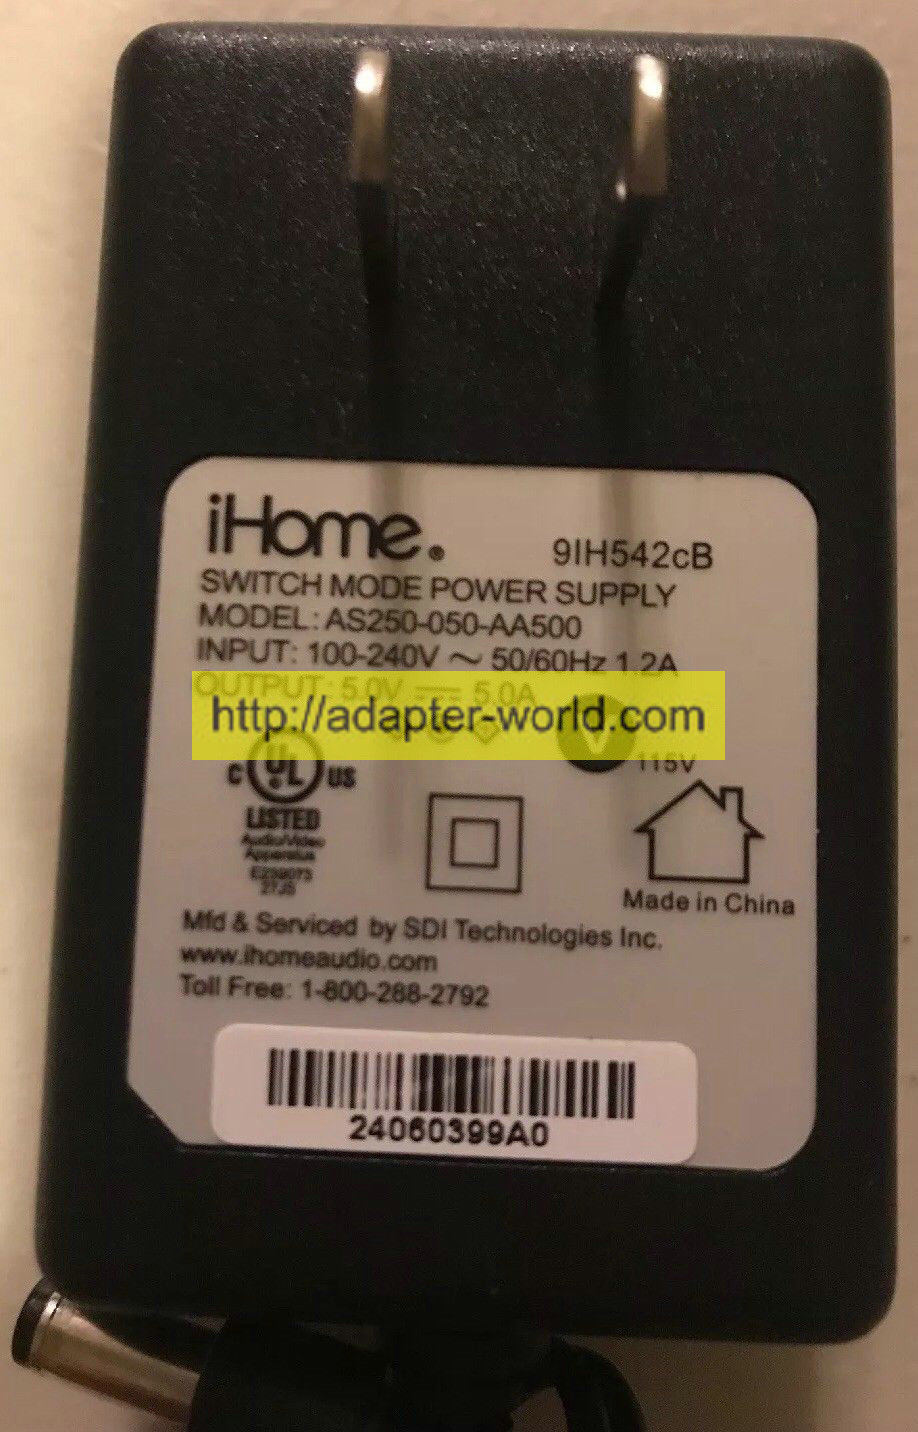 *100% Brand NEW* iHome AS250-050-AA500 Output 5V 5.0A 9IH542cB AC Replacement Power Adapter Free shipping!